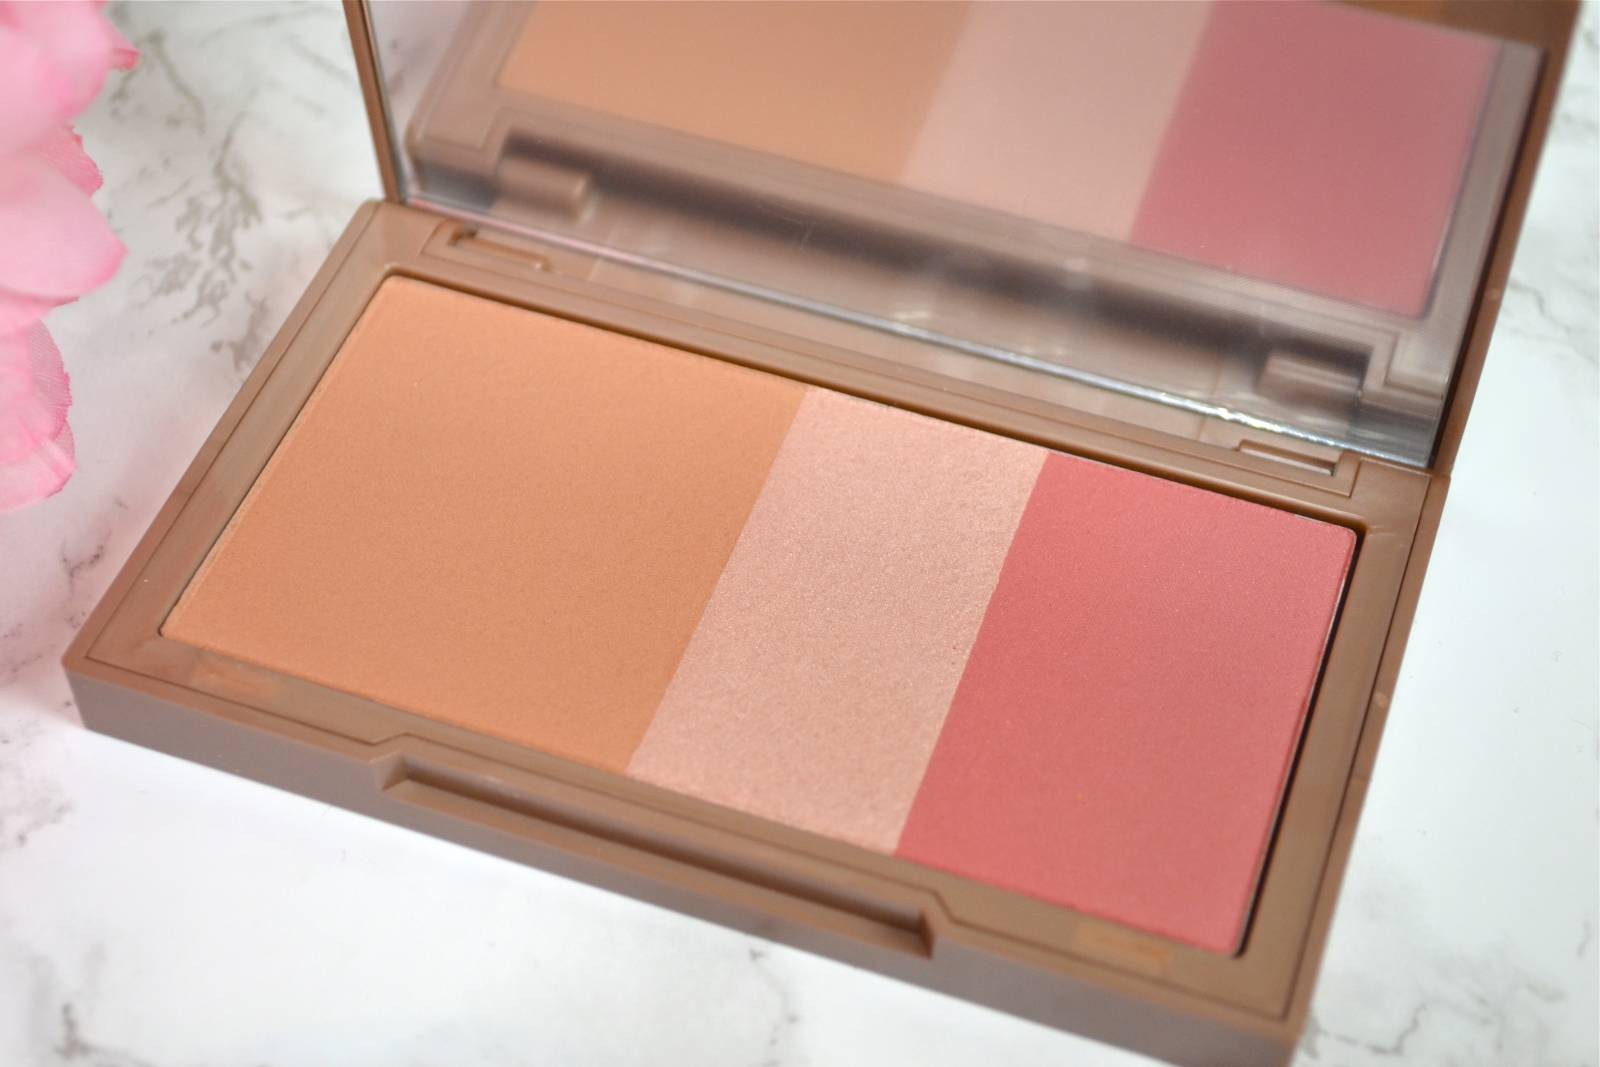 urban-decay-naked-flushed-palette-review